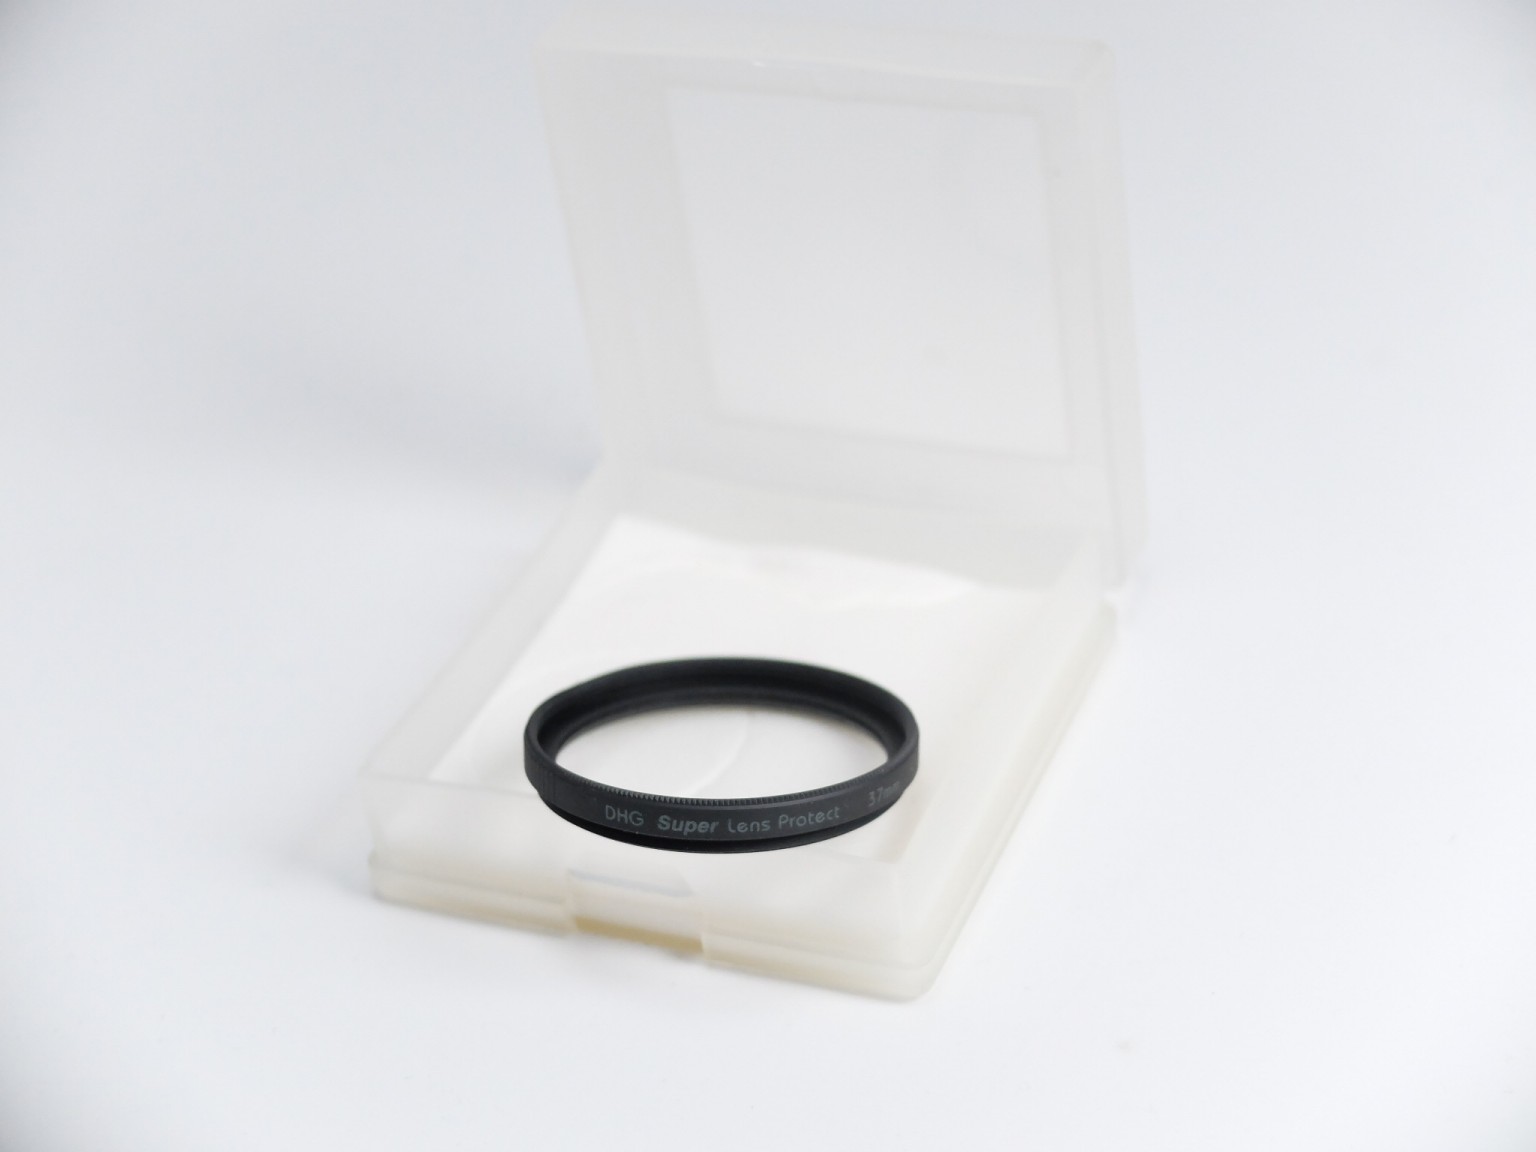 Marumi 37mm DHG Lens Protect Filter (二手器材)